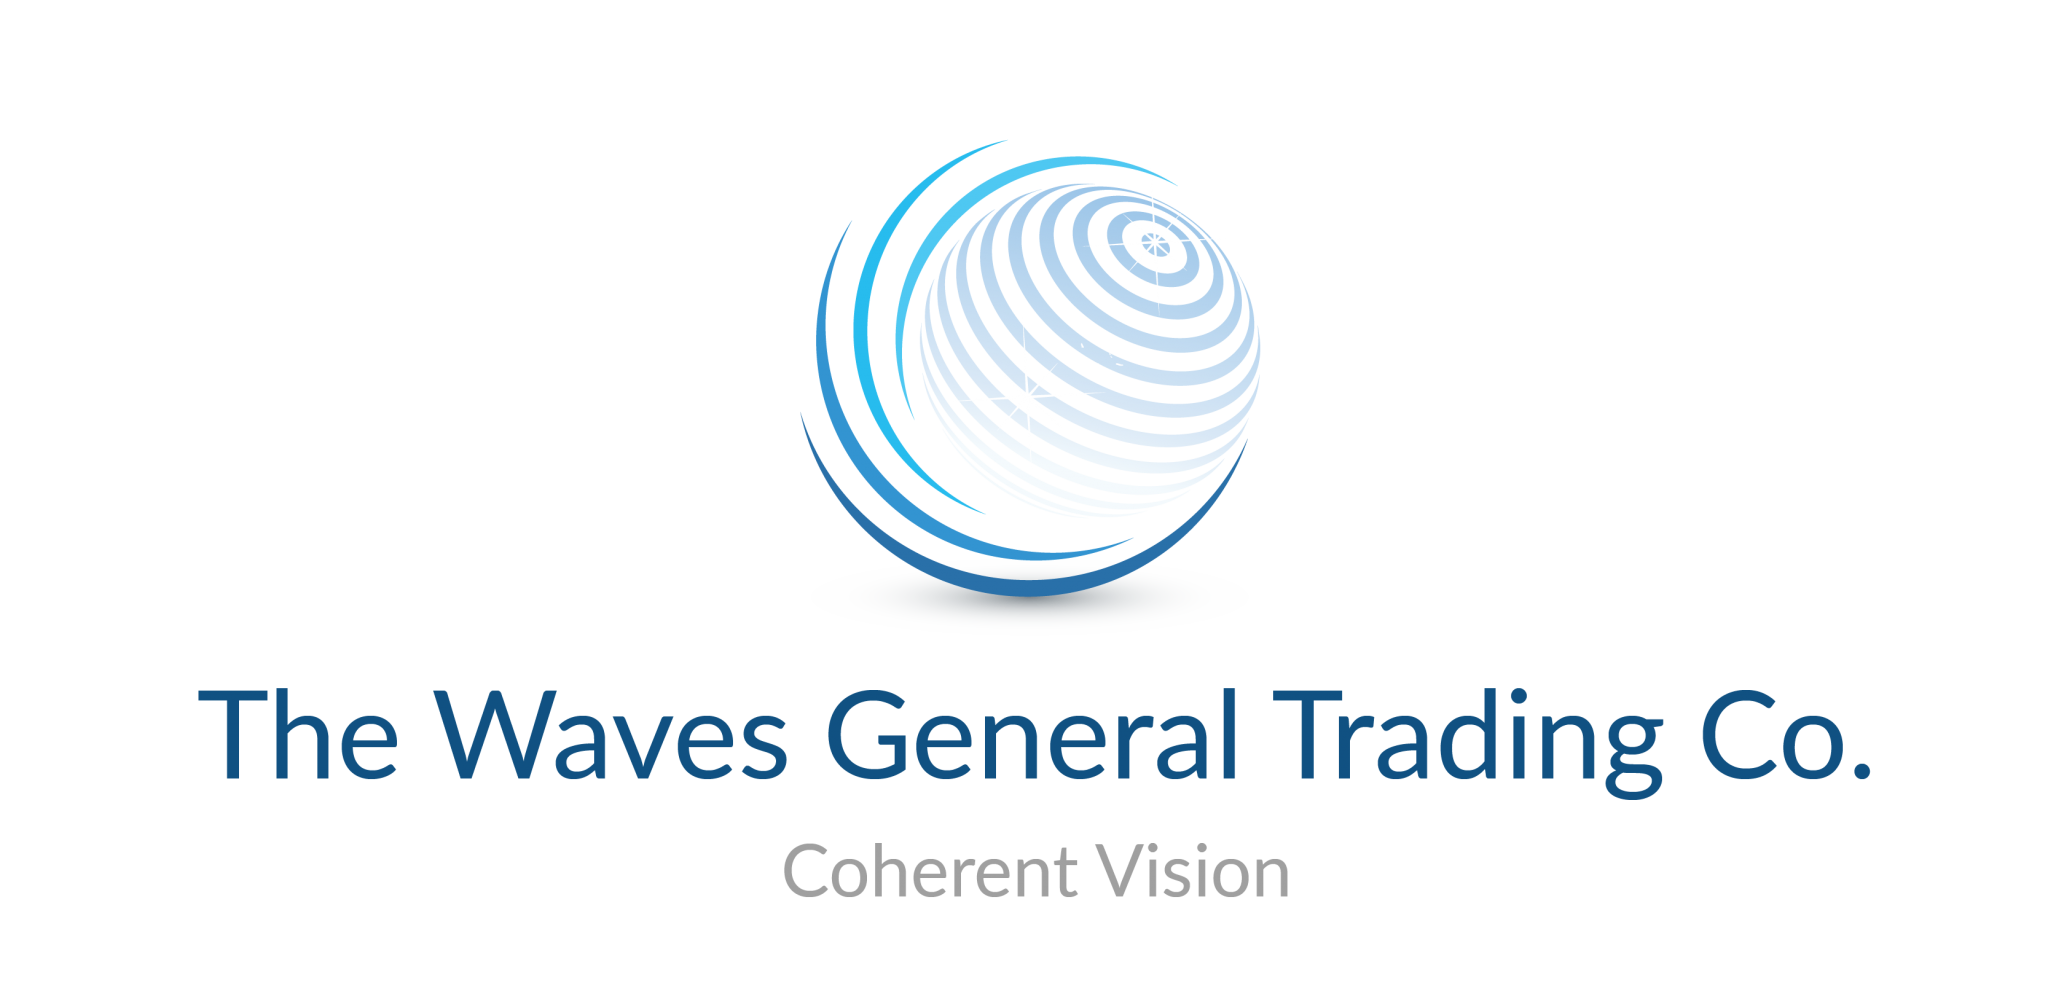 We trade waves course